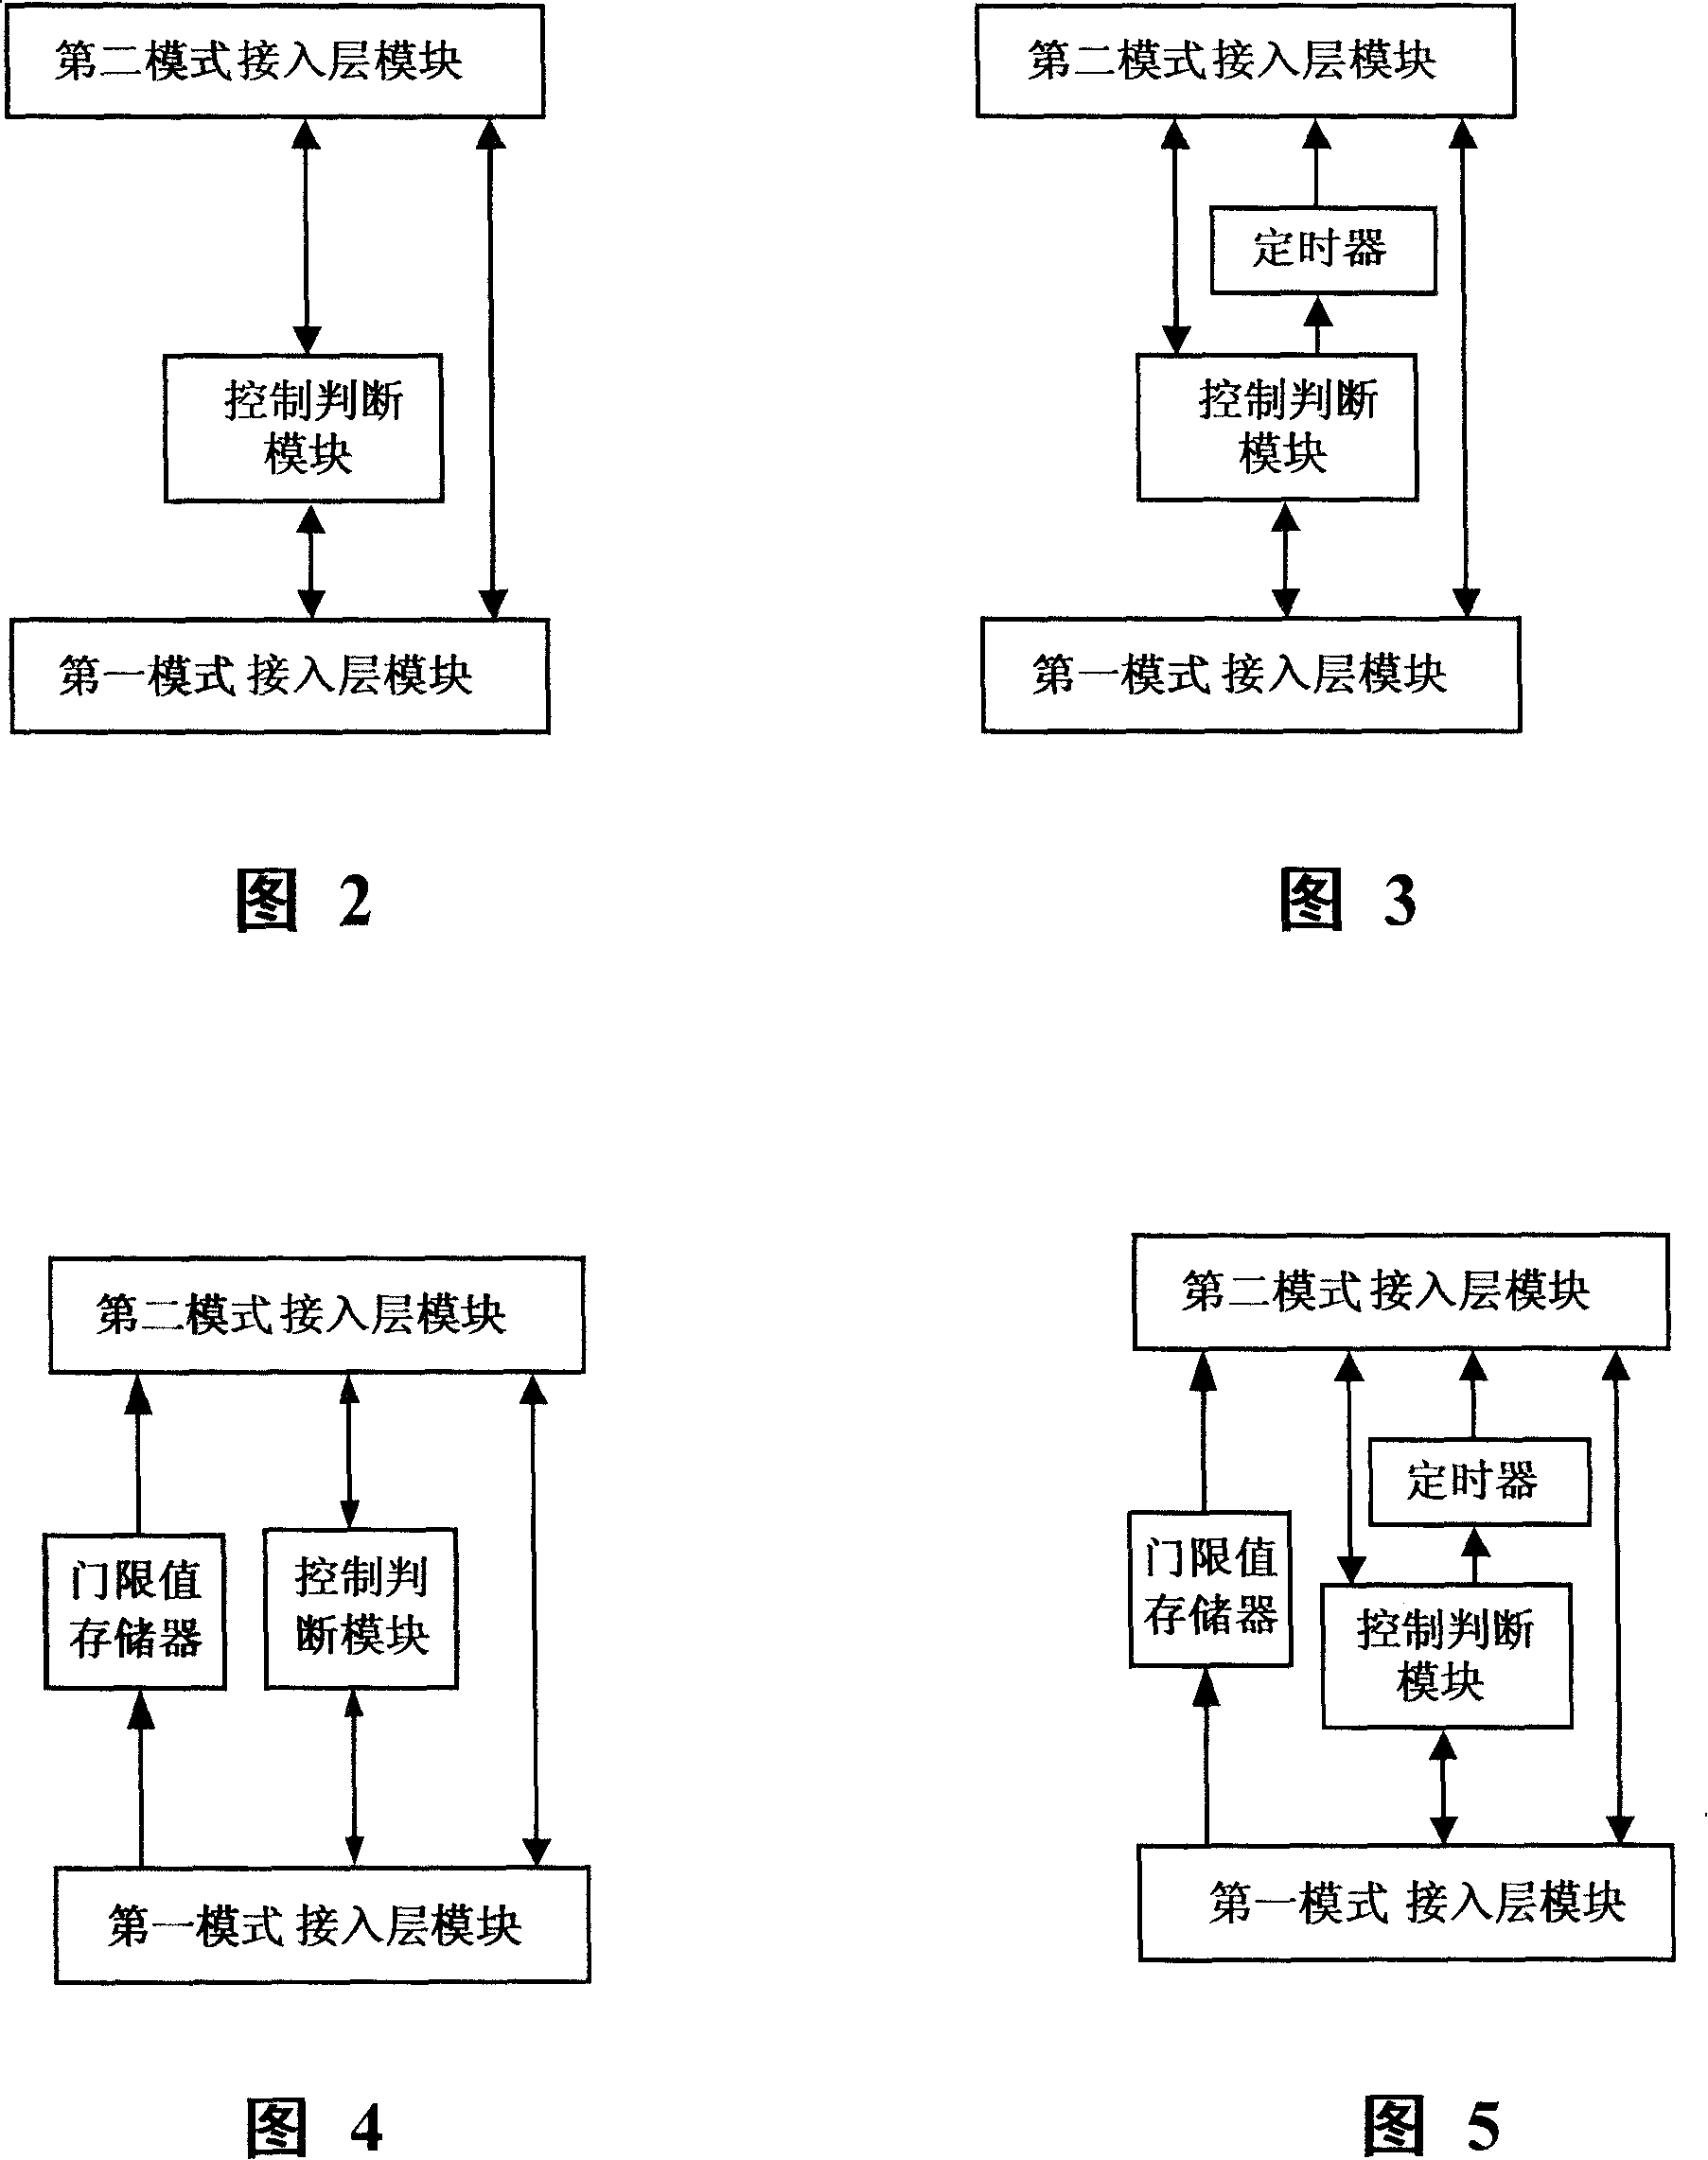 Double module terminal and its method for selecting resident network